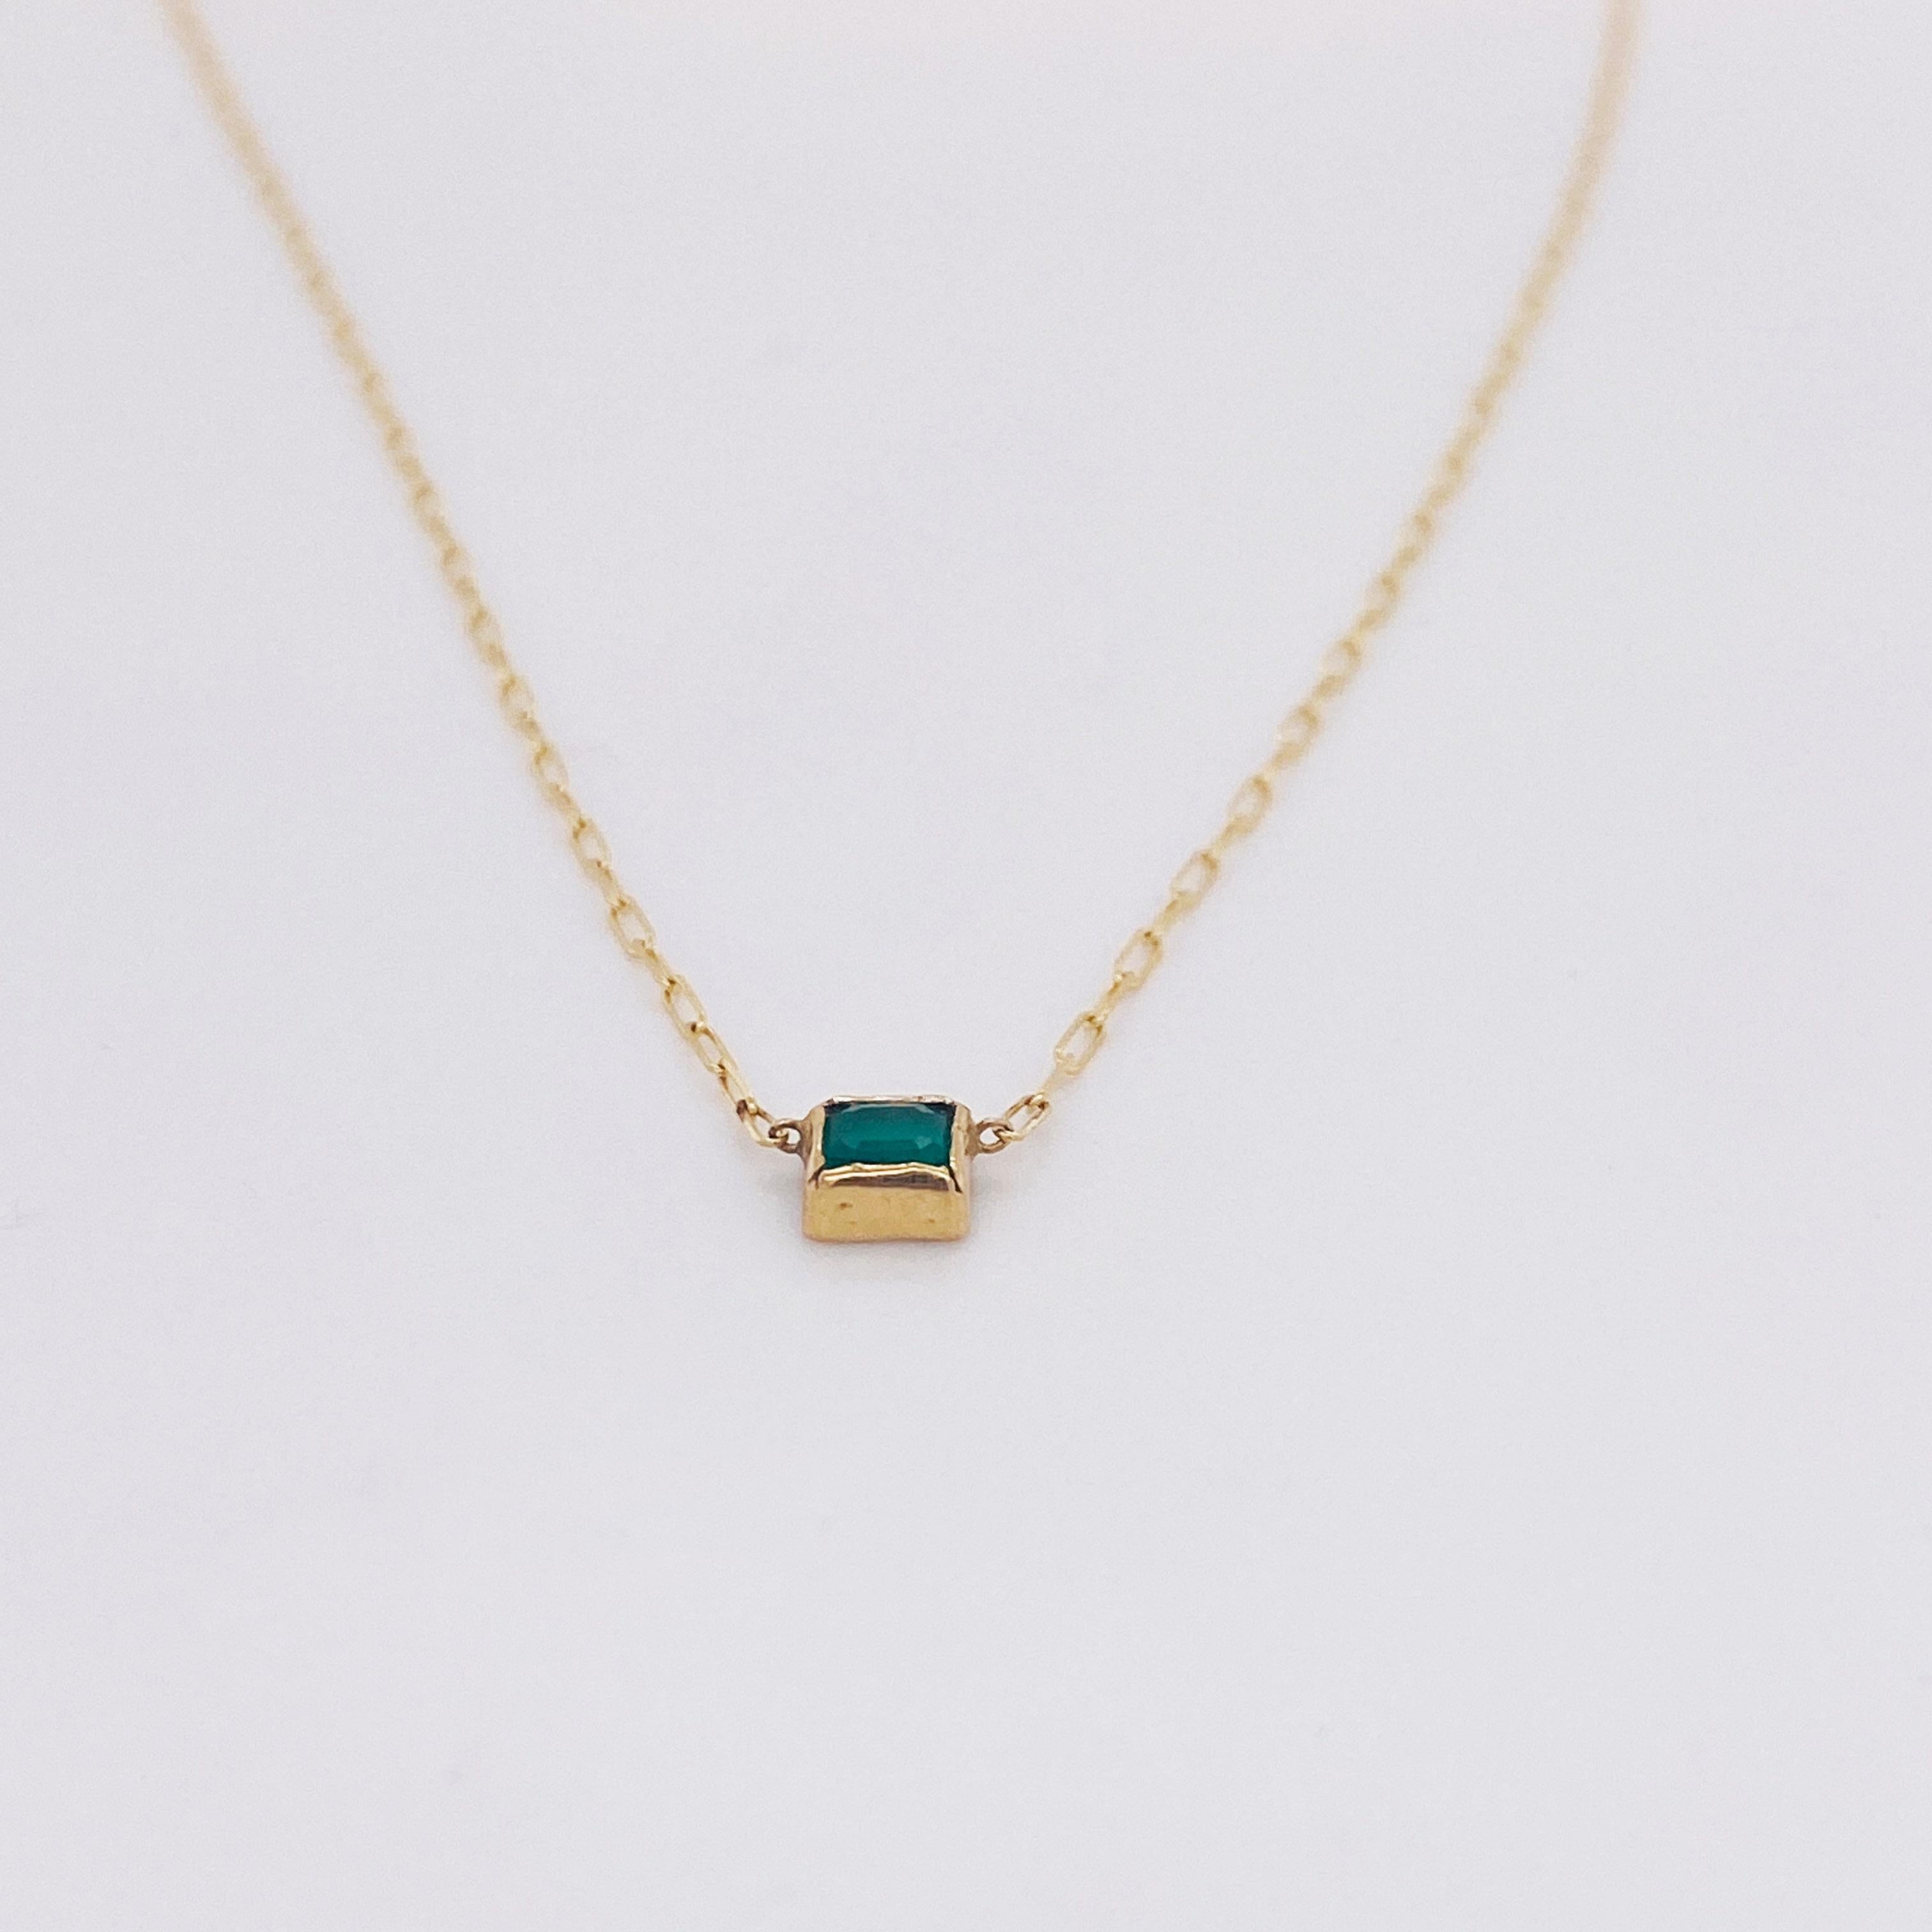 An emerald is a very valuable gemstone and it is very appealing to the eye. This necklace couples the perfect green color with this gorgeous exquisite 14-karat yellow, 1-millimeter paper clip chain! It is 16.5 inches long. Emerald also looks great